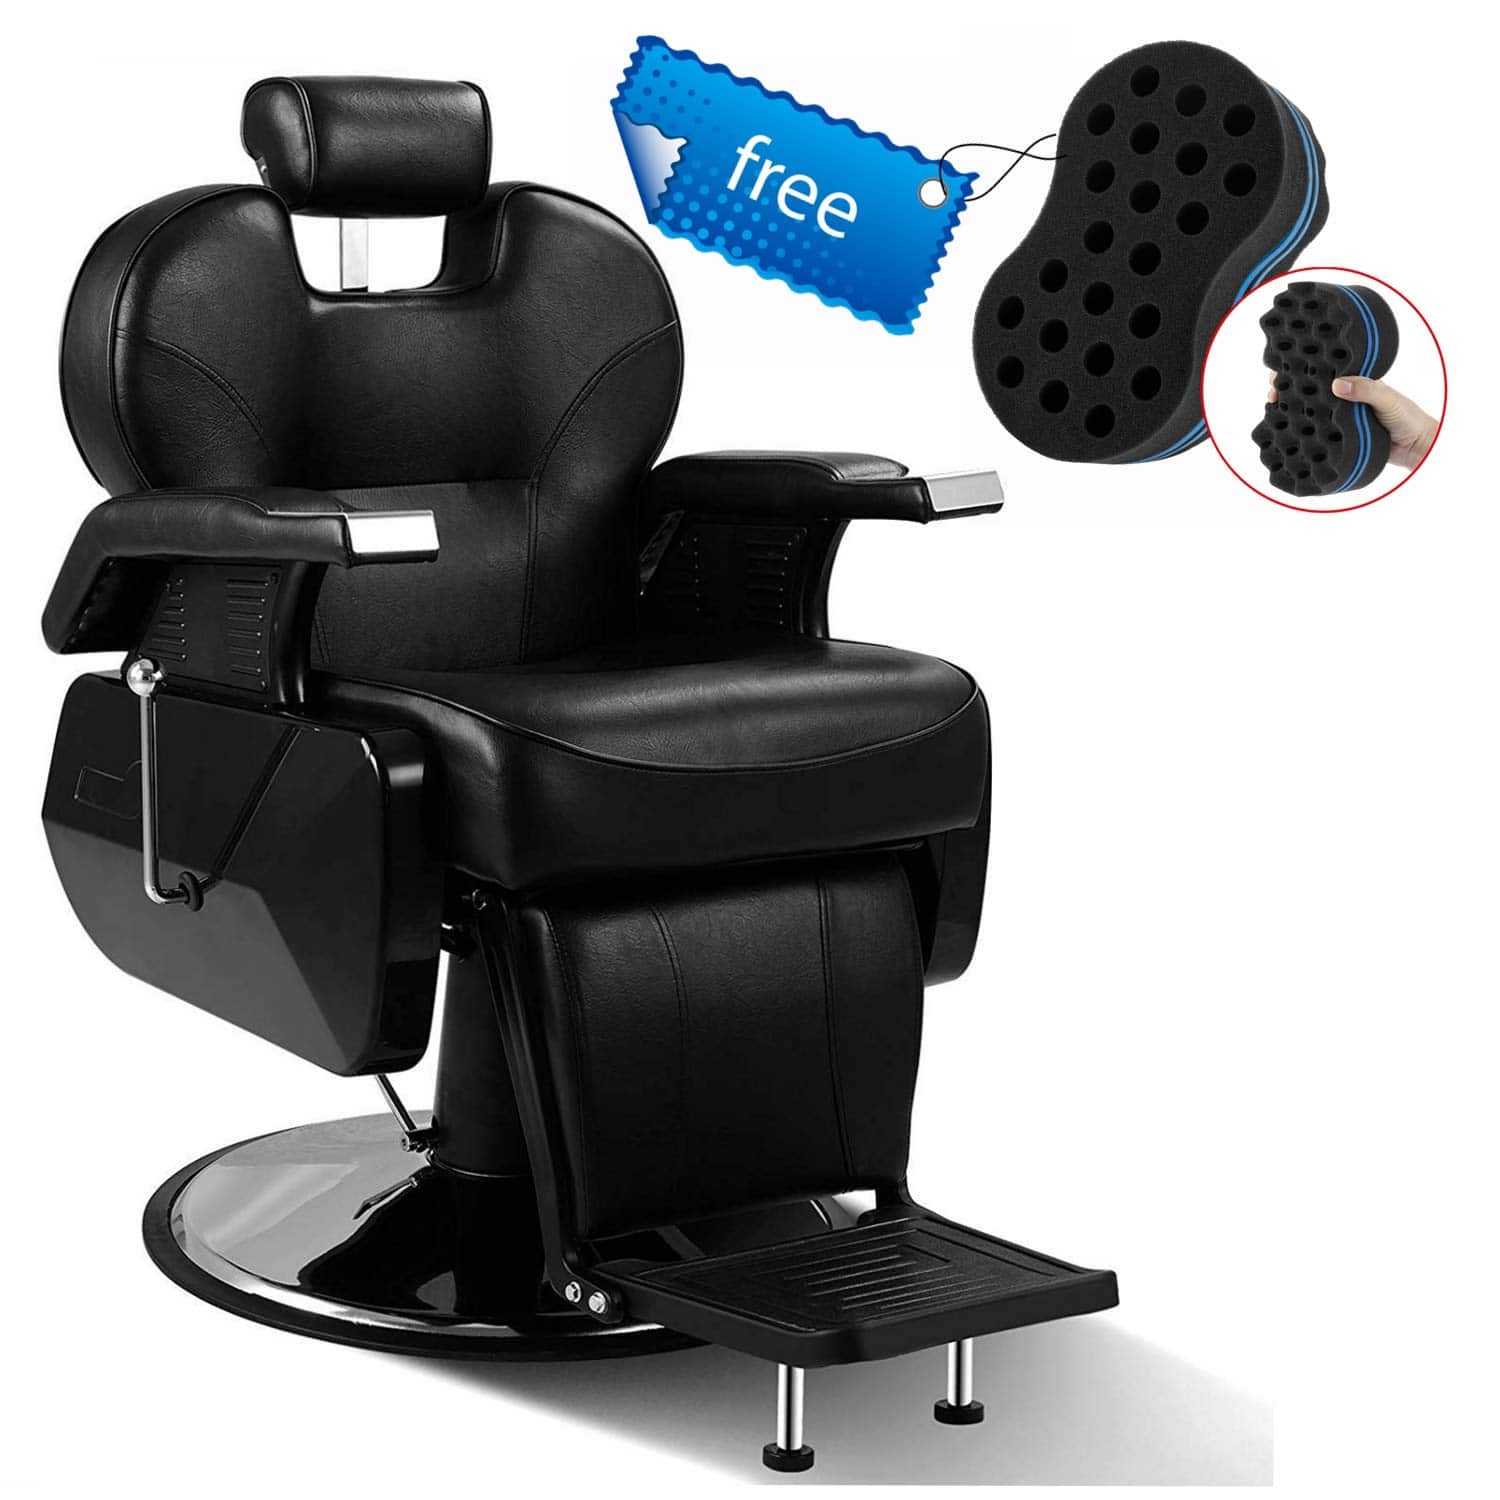 Black All Purpose Hydraulic Recline Barber Chair with Free Twist Hair Brush Sponge Salon Beauty Styling Chair for Beauty Shop